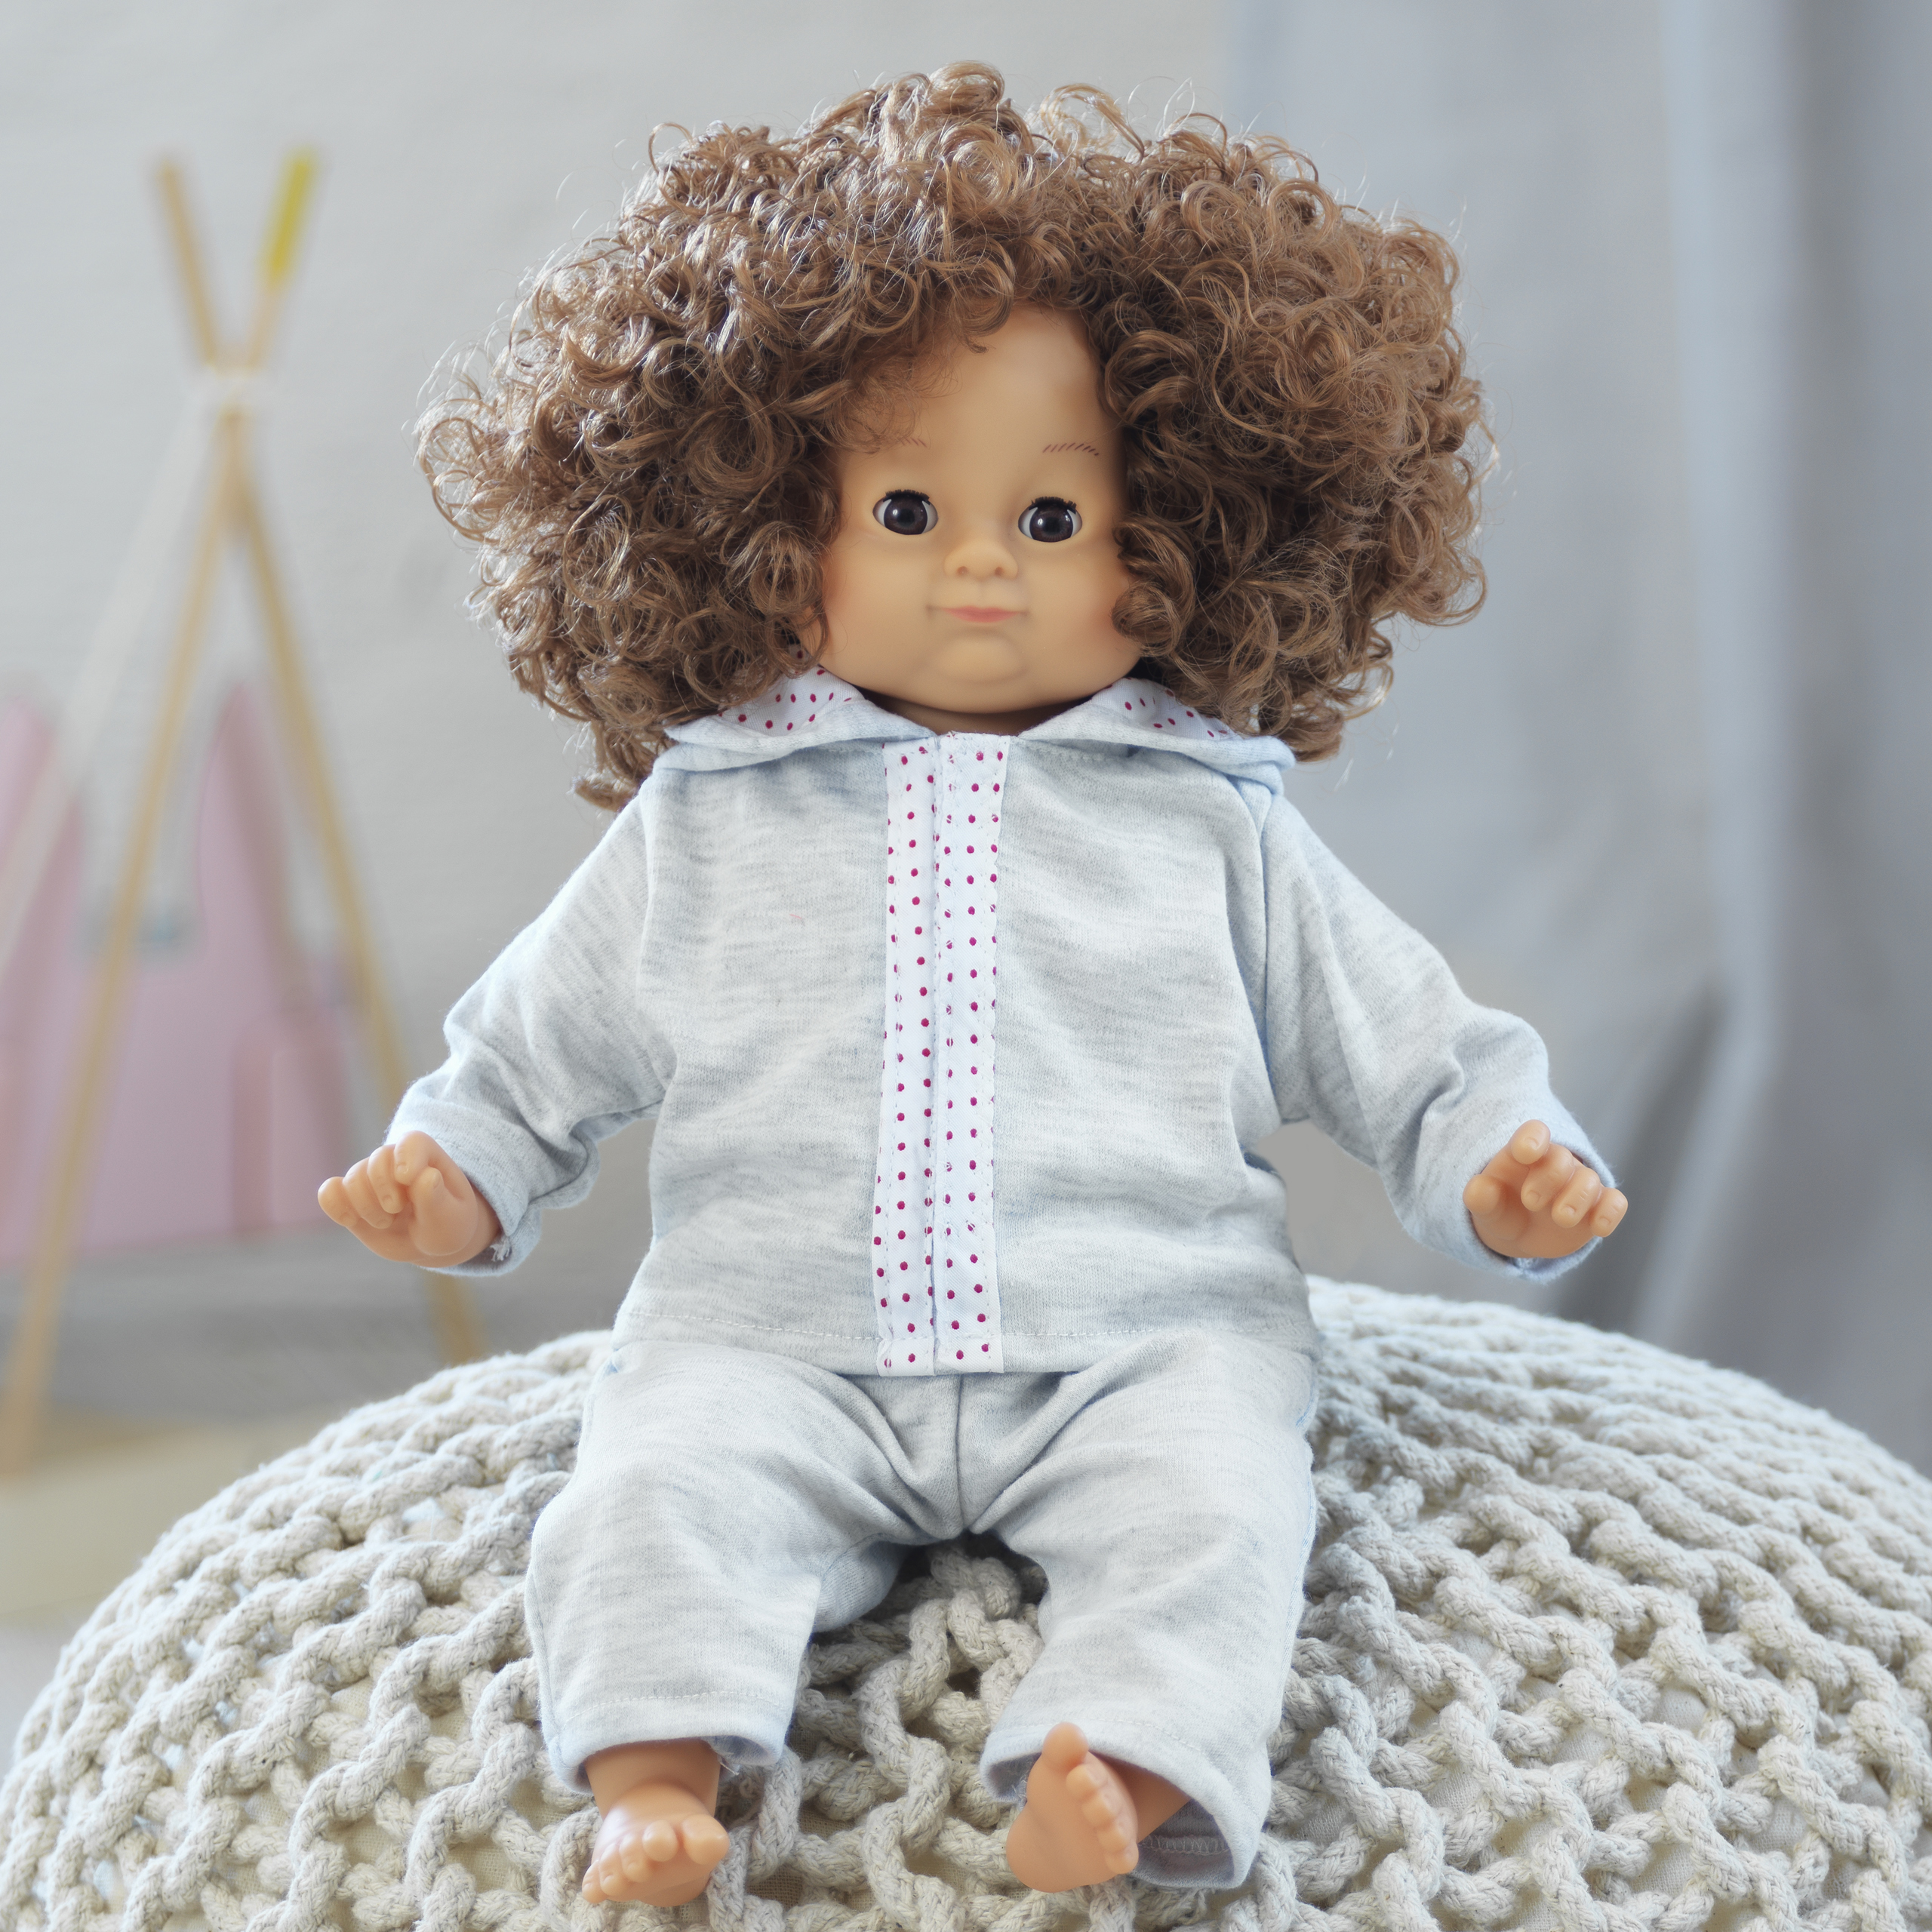 Doll clothes lundby	doll clothes casual dress 36 cm